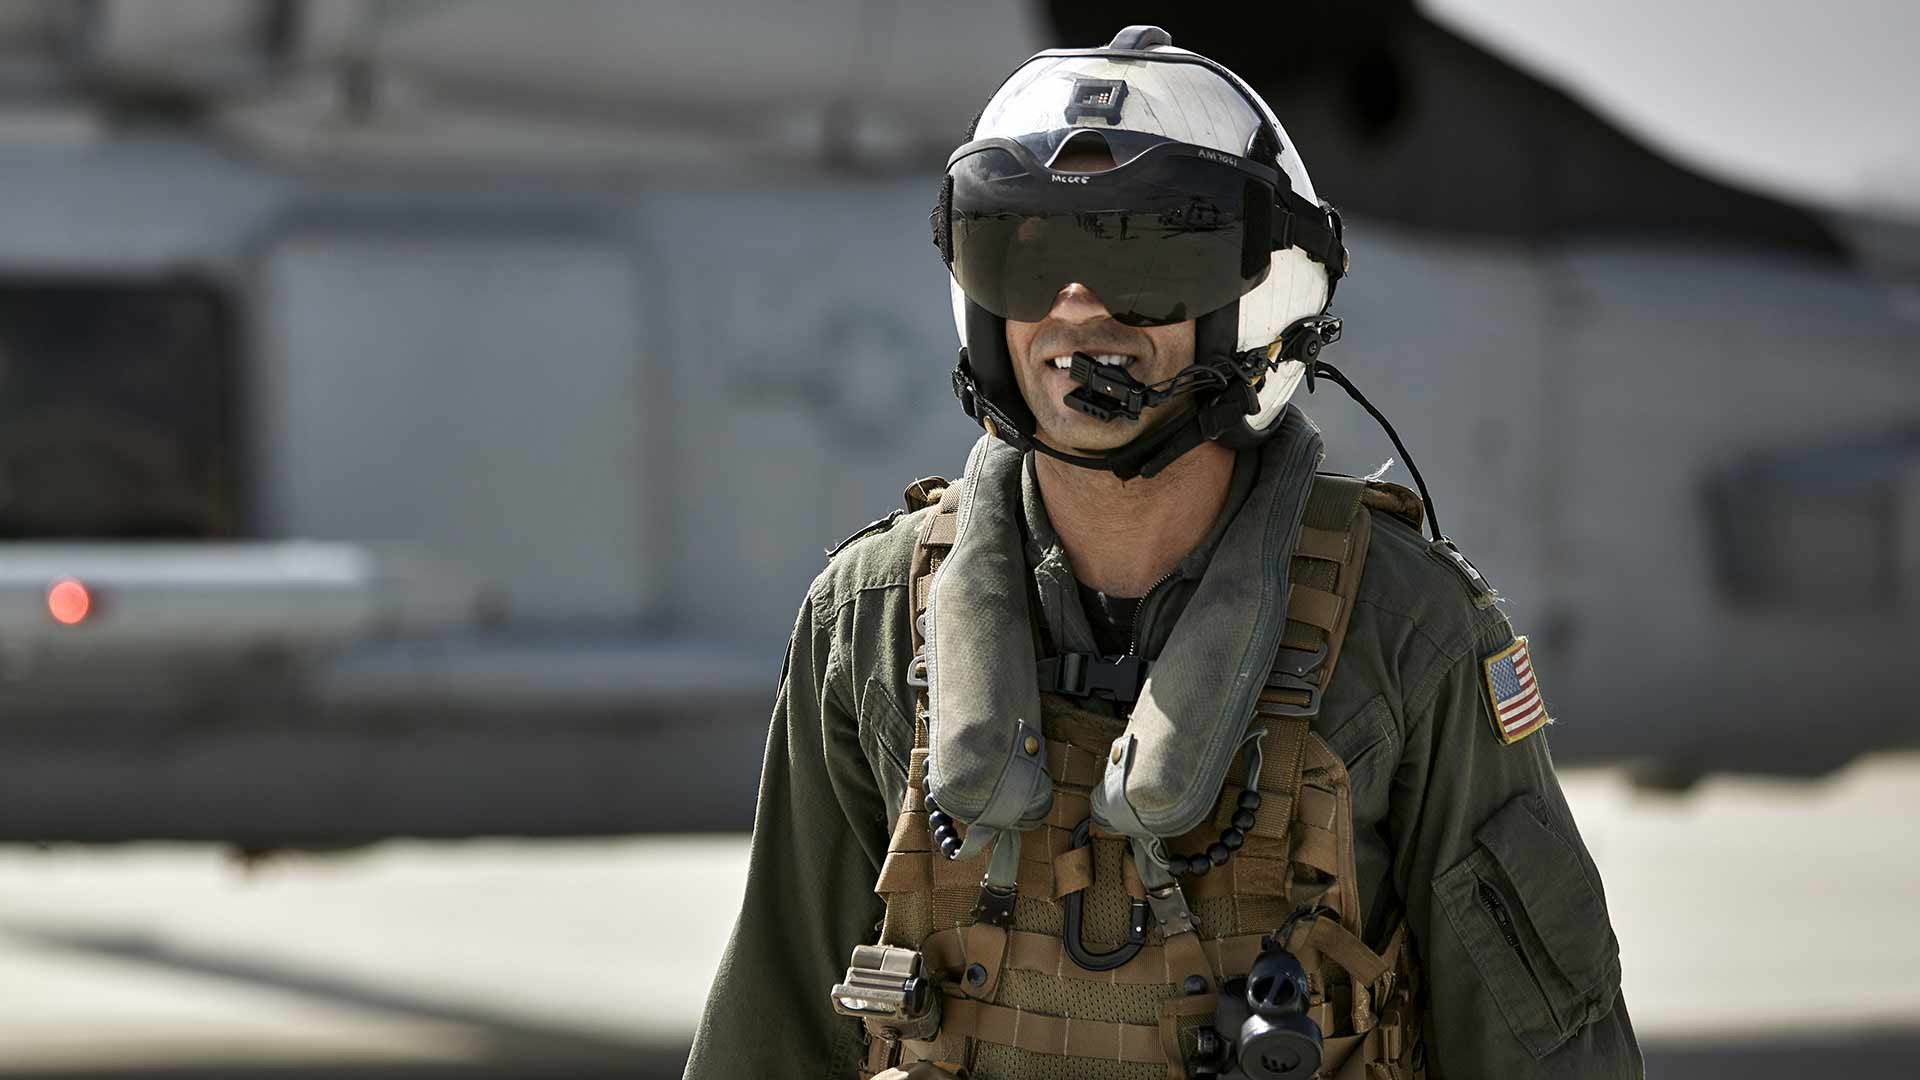 Navy fighter pilot Aeric McGee walks prepares to board a fighter jet in full aviation gear aboard a US aircraft carrier. 